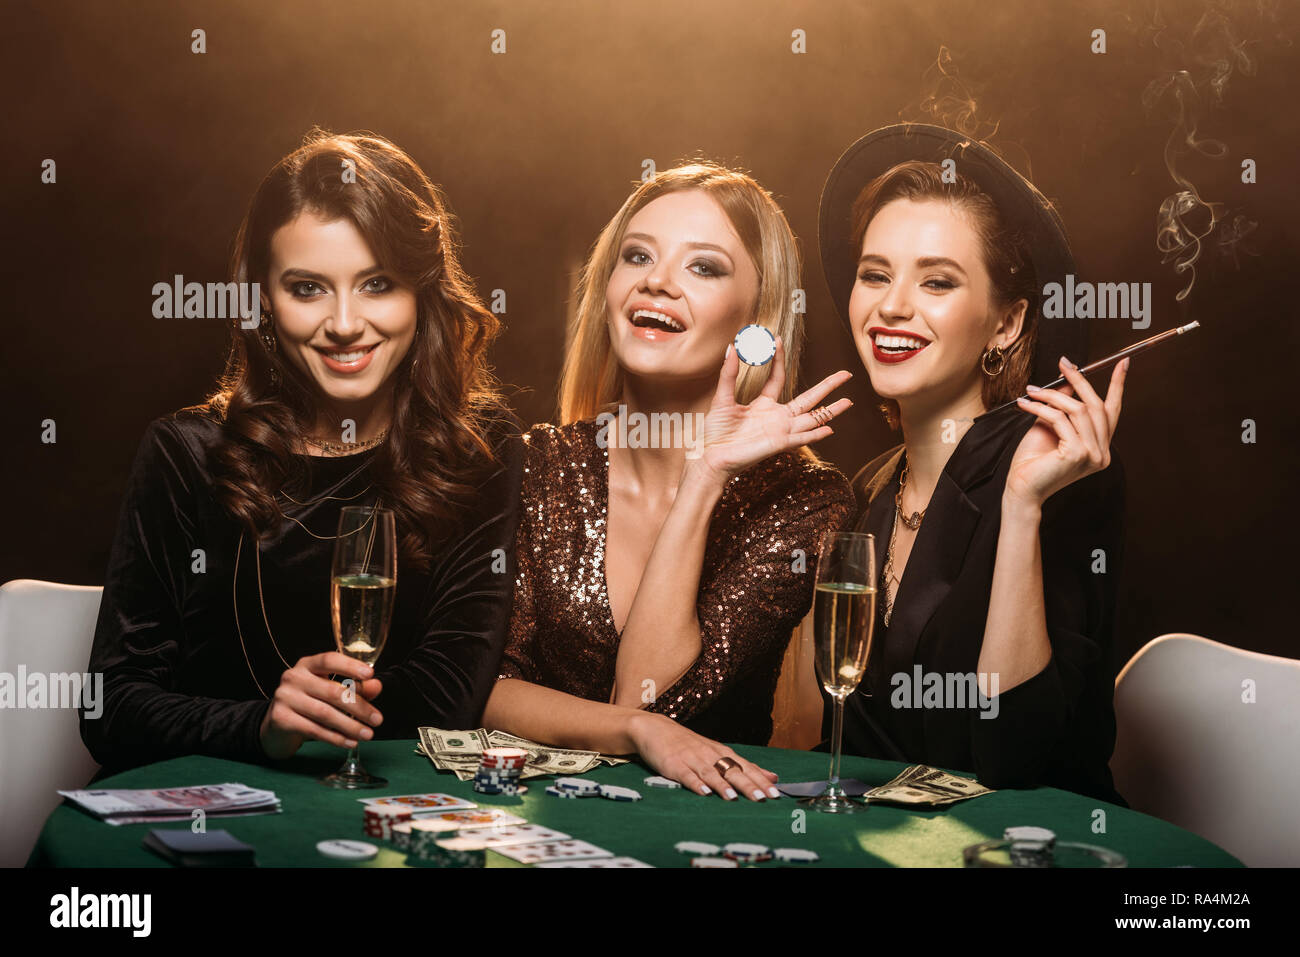 laughing attractive girls with glass of champagne, cigarette and poker chips sitting at table in casino Stock Photo